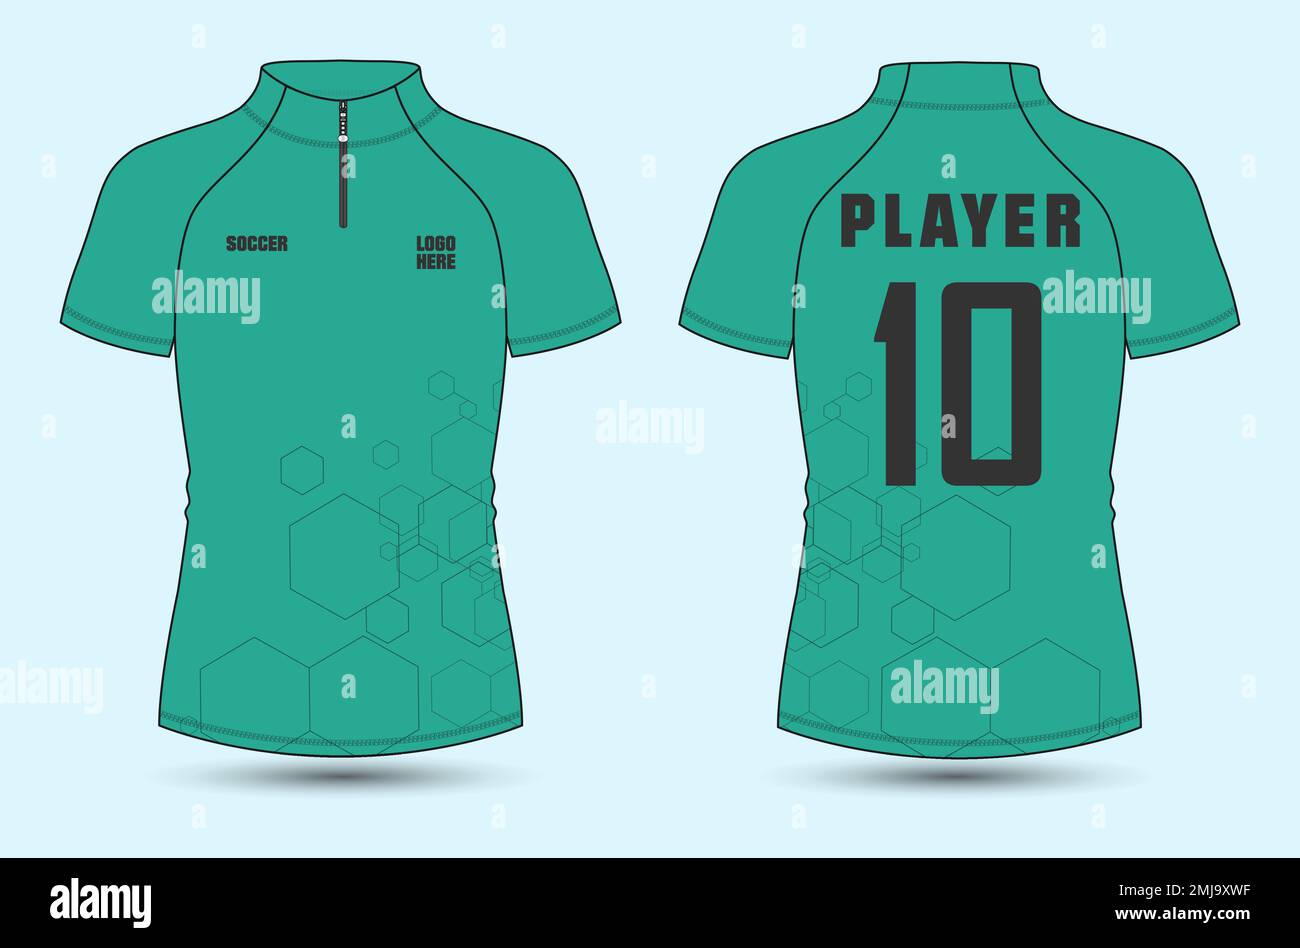 Sports jersey and t-shirt template sports jersey design vector mockup